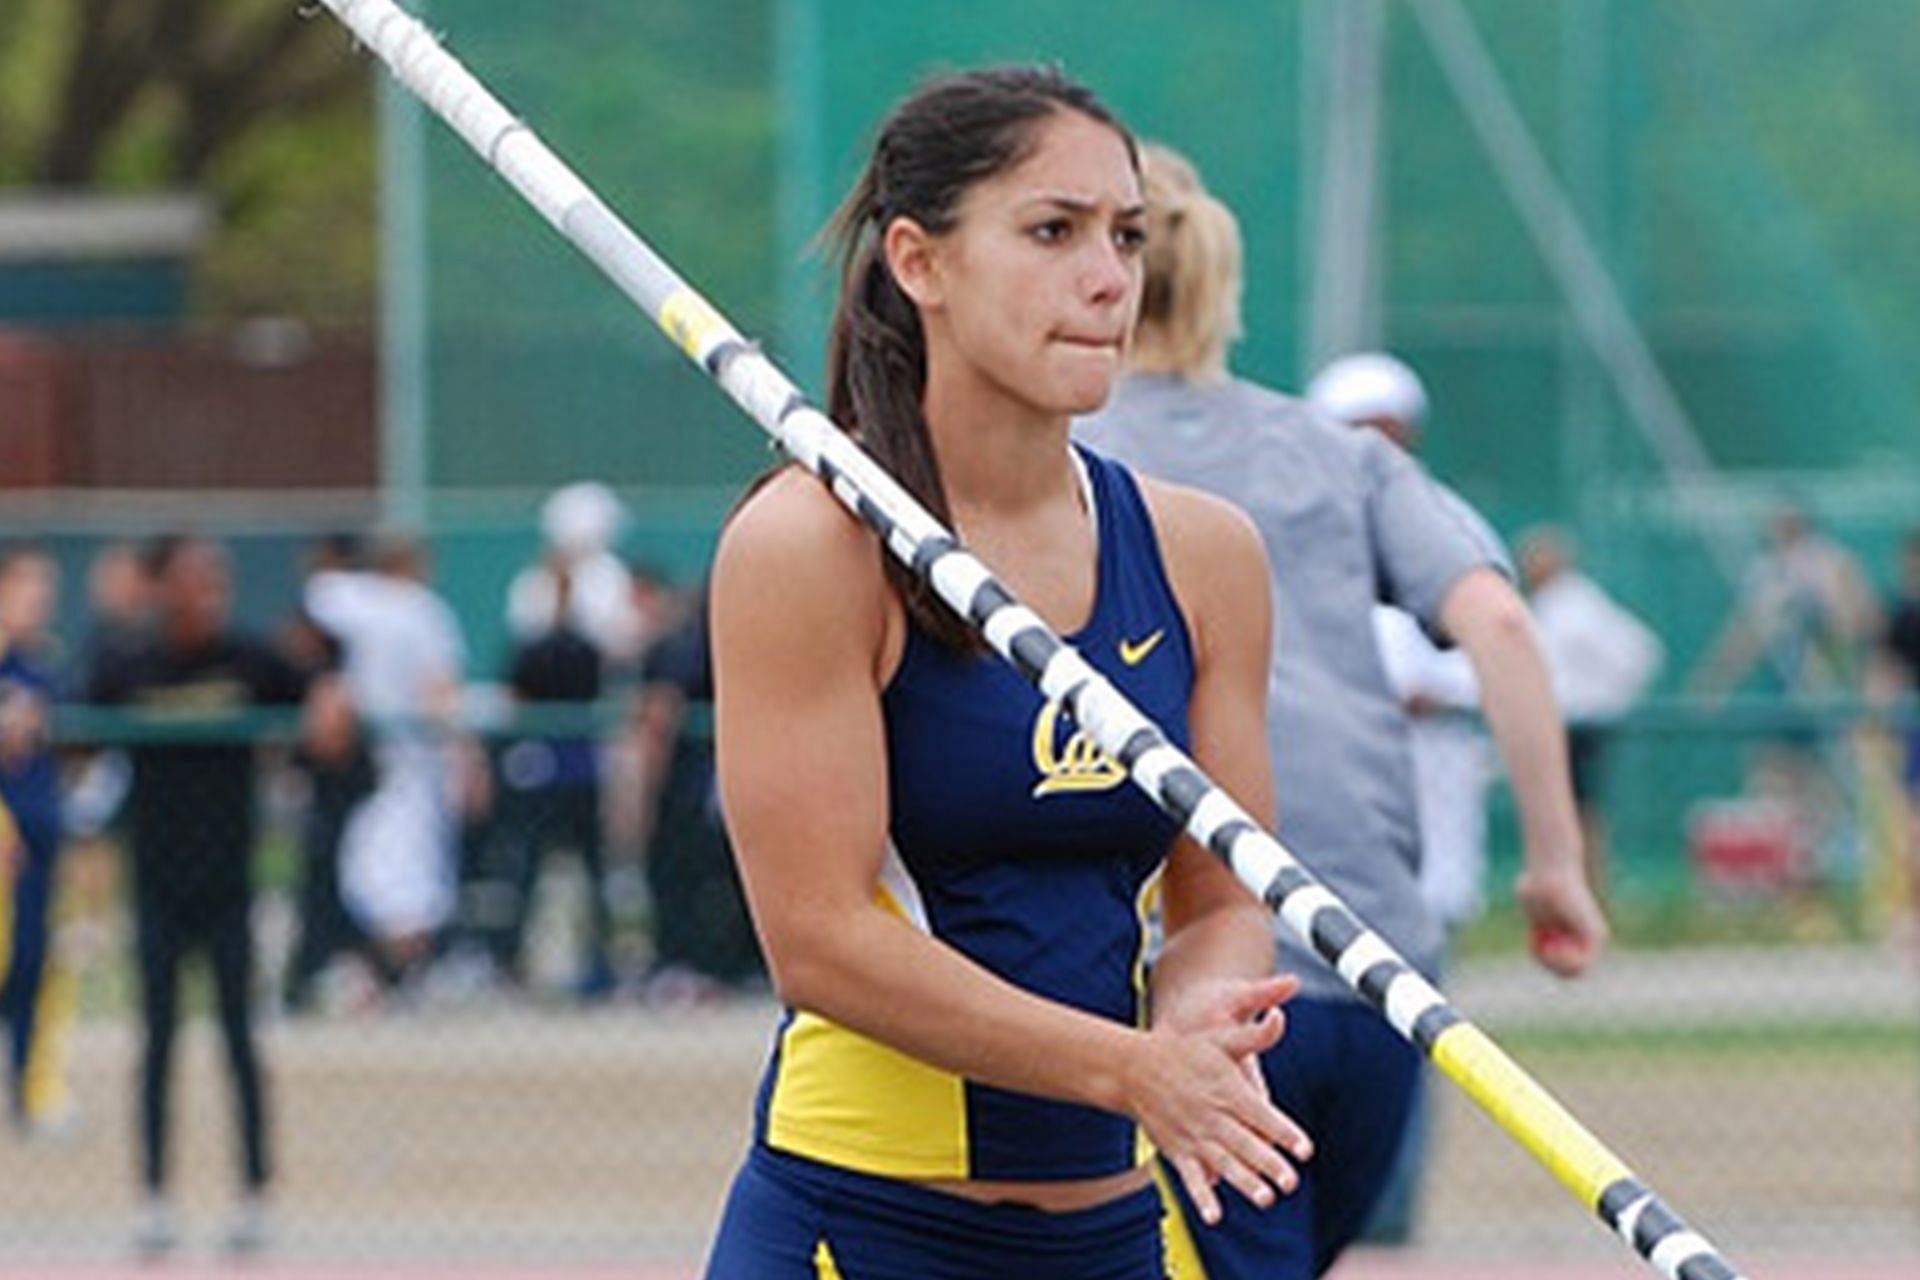 Allison Stokke was a professional American pole-vaulter.